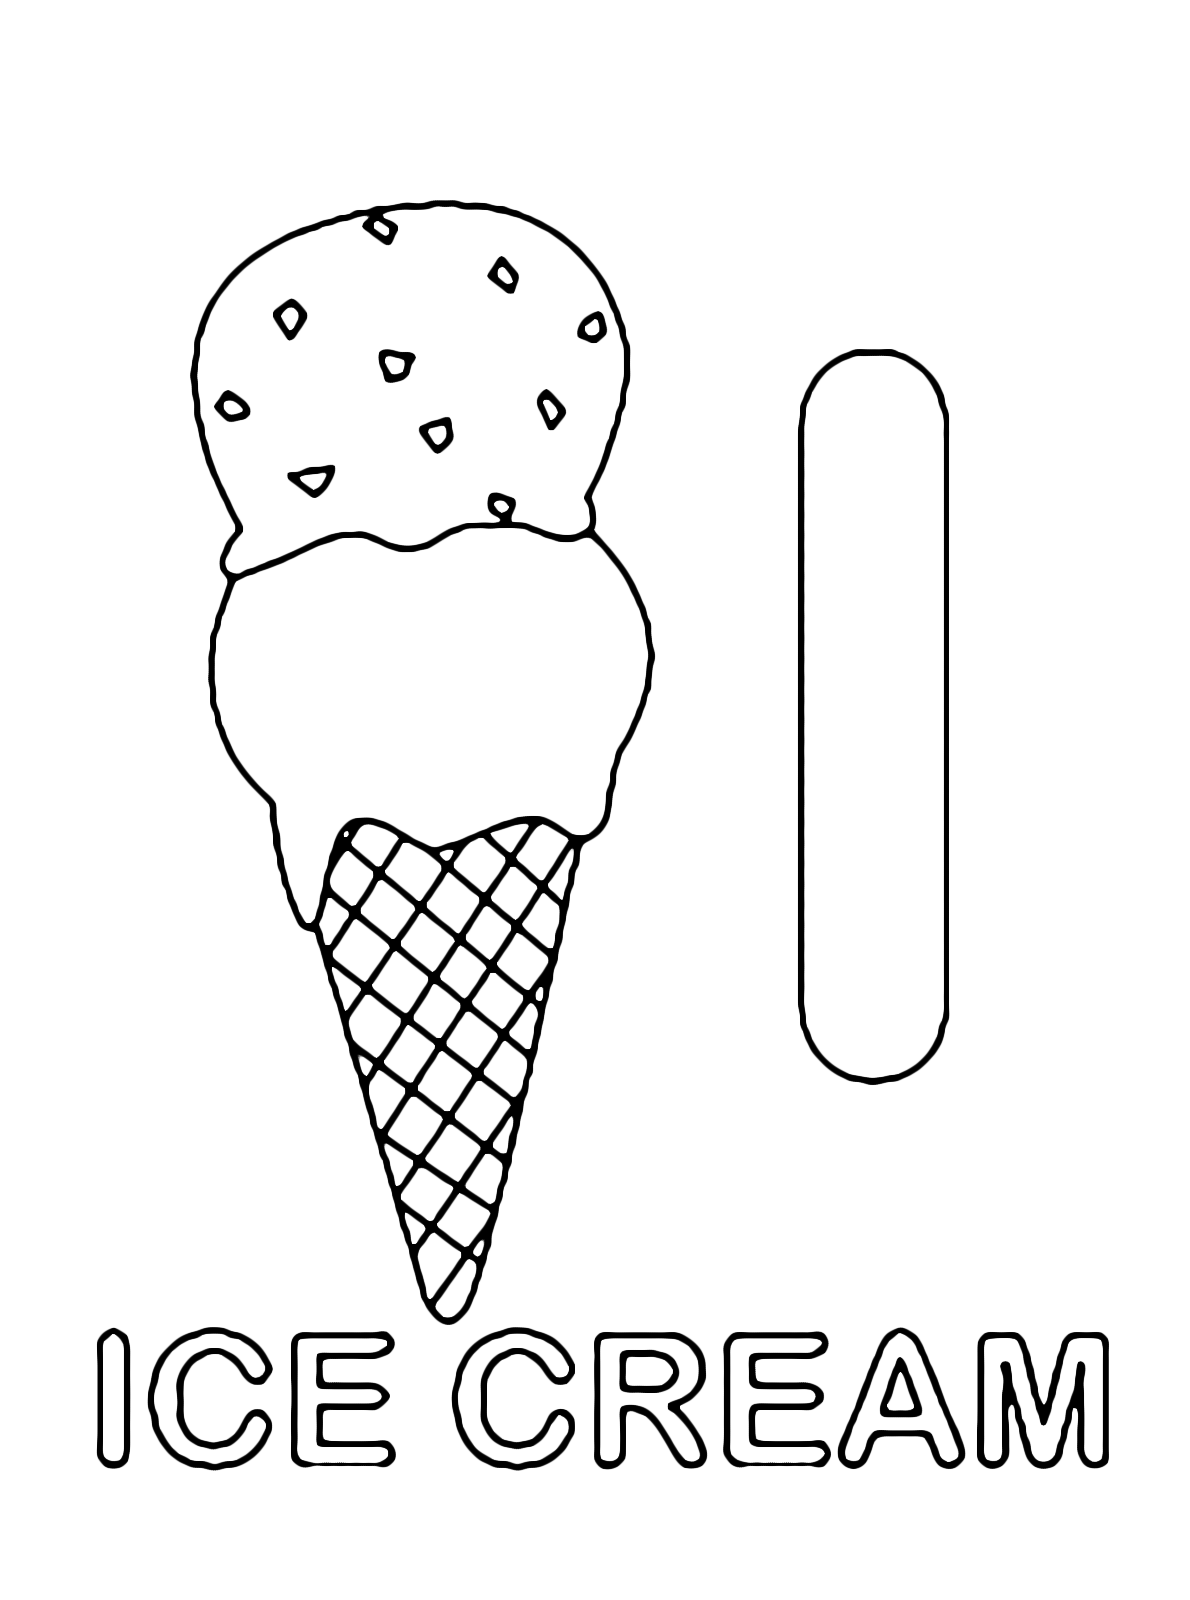 Letters and numbers - I for ice cream uppercase letter